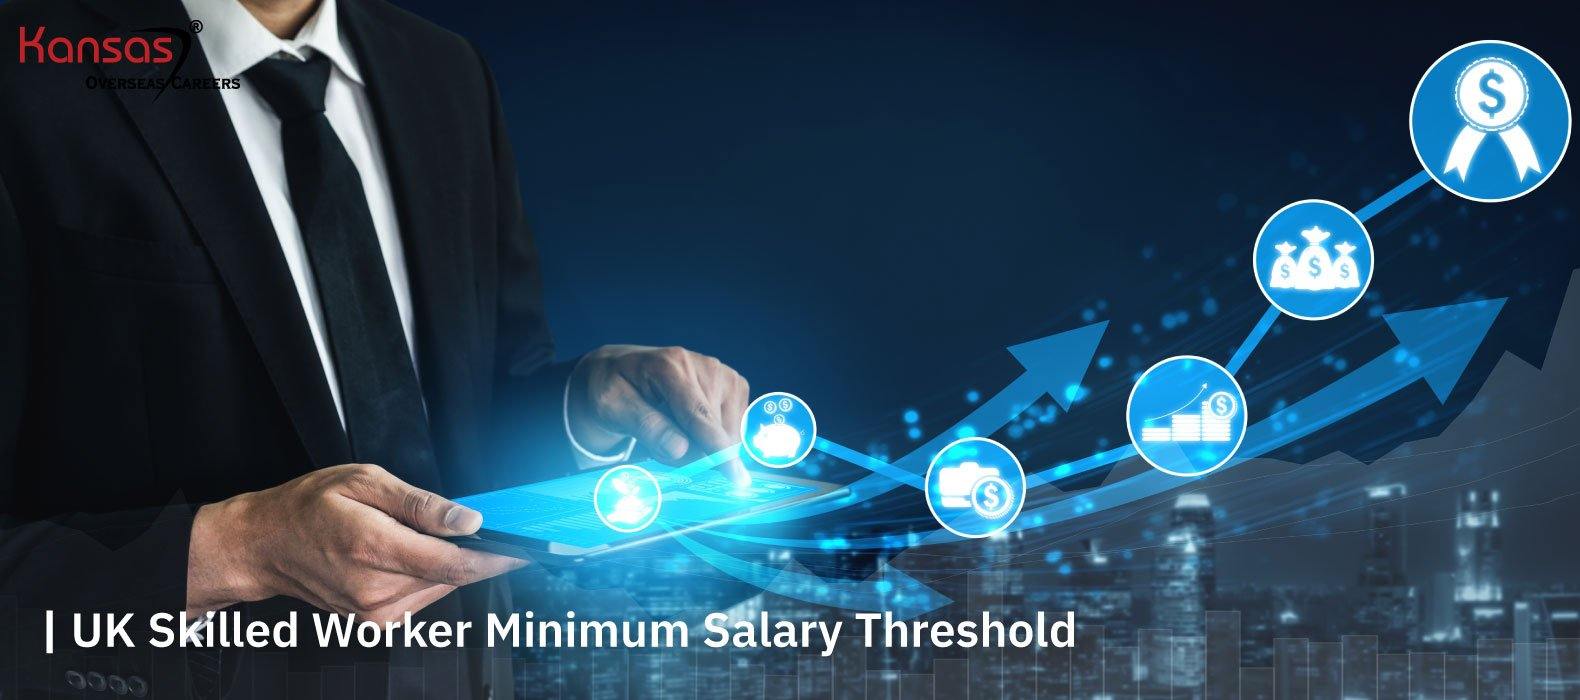 A-job-must-meet-the-‘Minimum-Salary-Threshold’-or-the-‘Going-Rate’